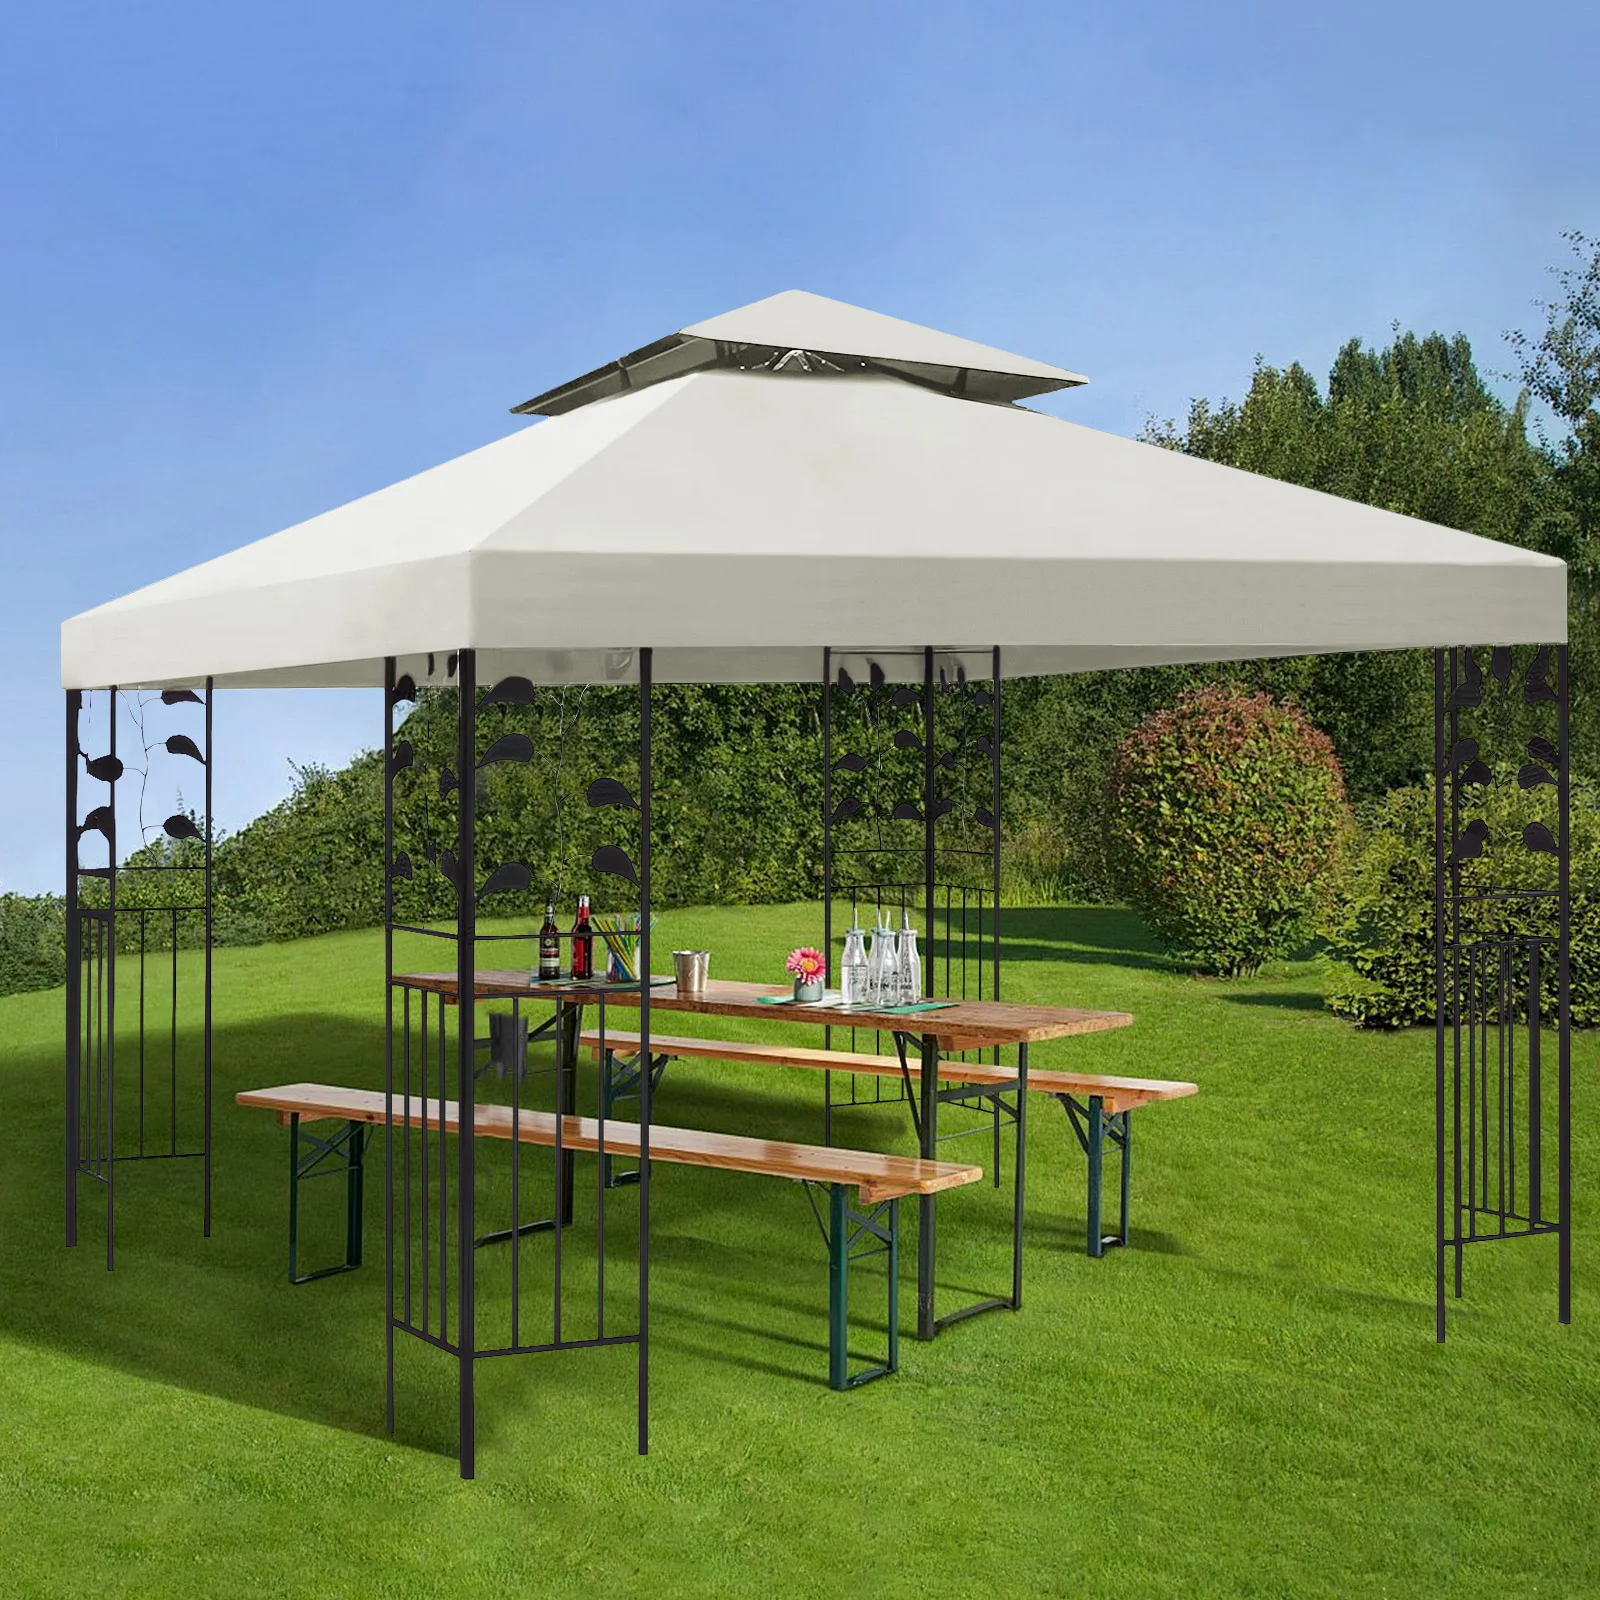 3x3m Canopy Replacement Top Canopy Cover Replacement 118"x118" Double Tiered Gazebo Covers for Yard Patio Garden Canopy Sunshade